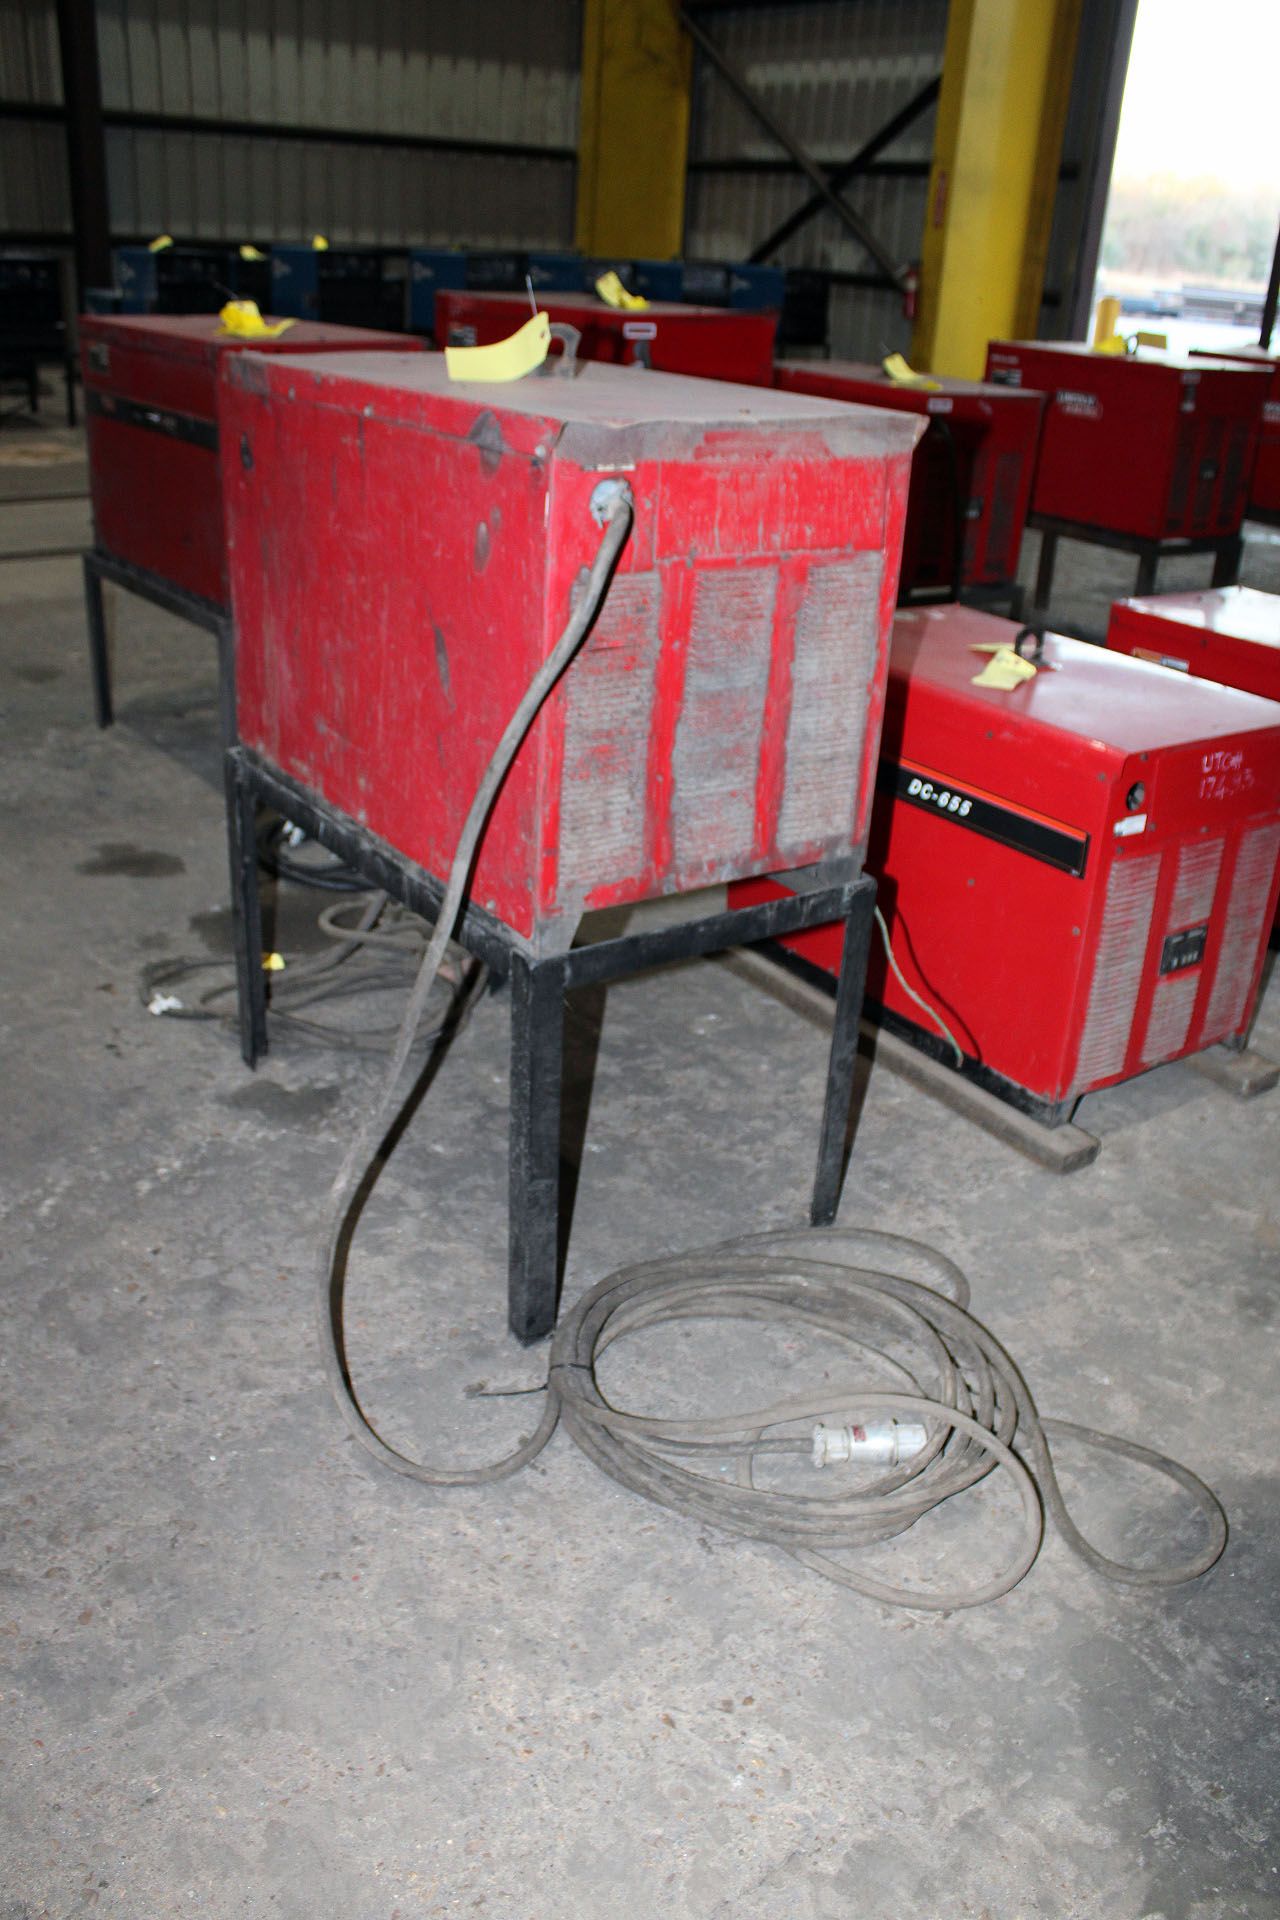 WELDING MACHINE, LINCOLN MDL. IDEALARC DC600 POWER SOURCE, new 1996, S/N U1960105586 - Image 2 of 3